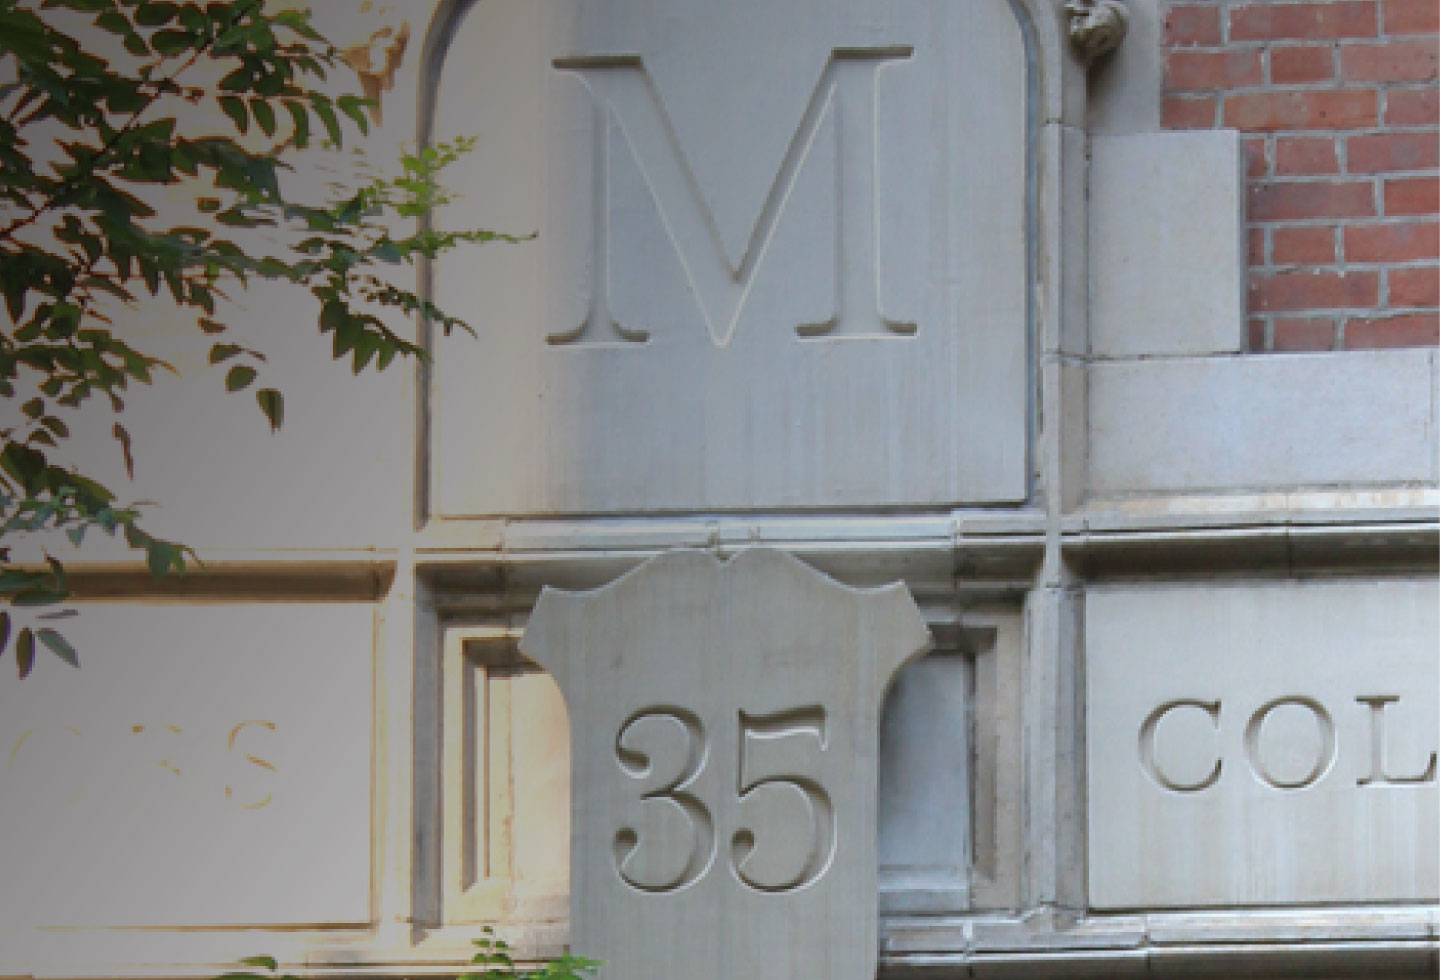 MHC Building number